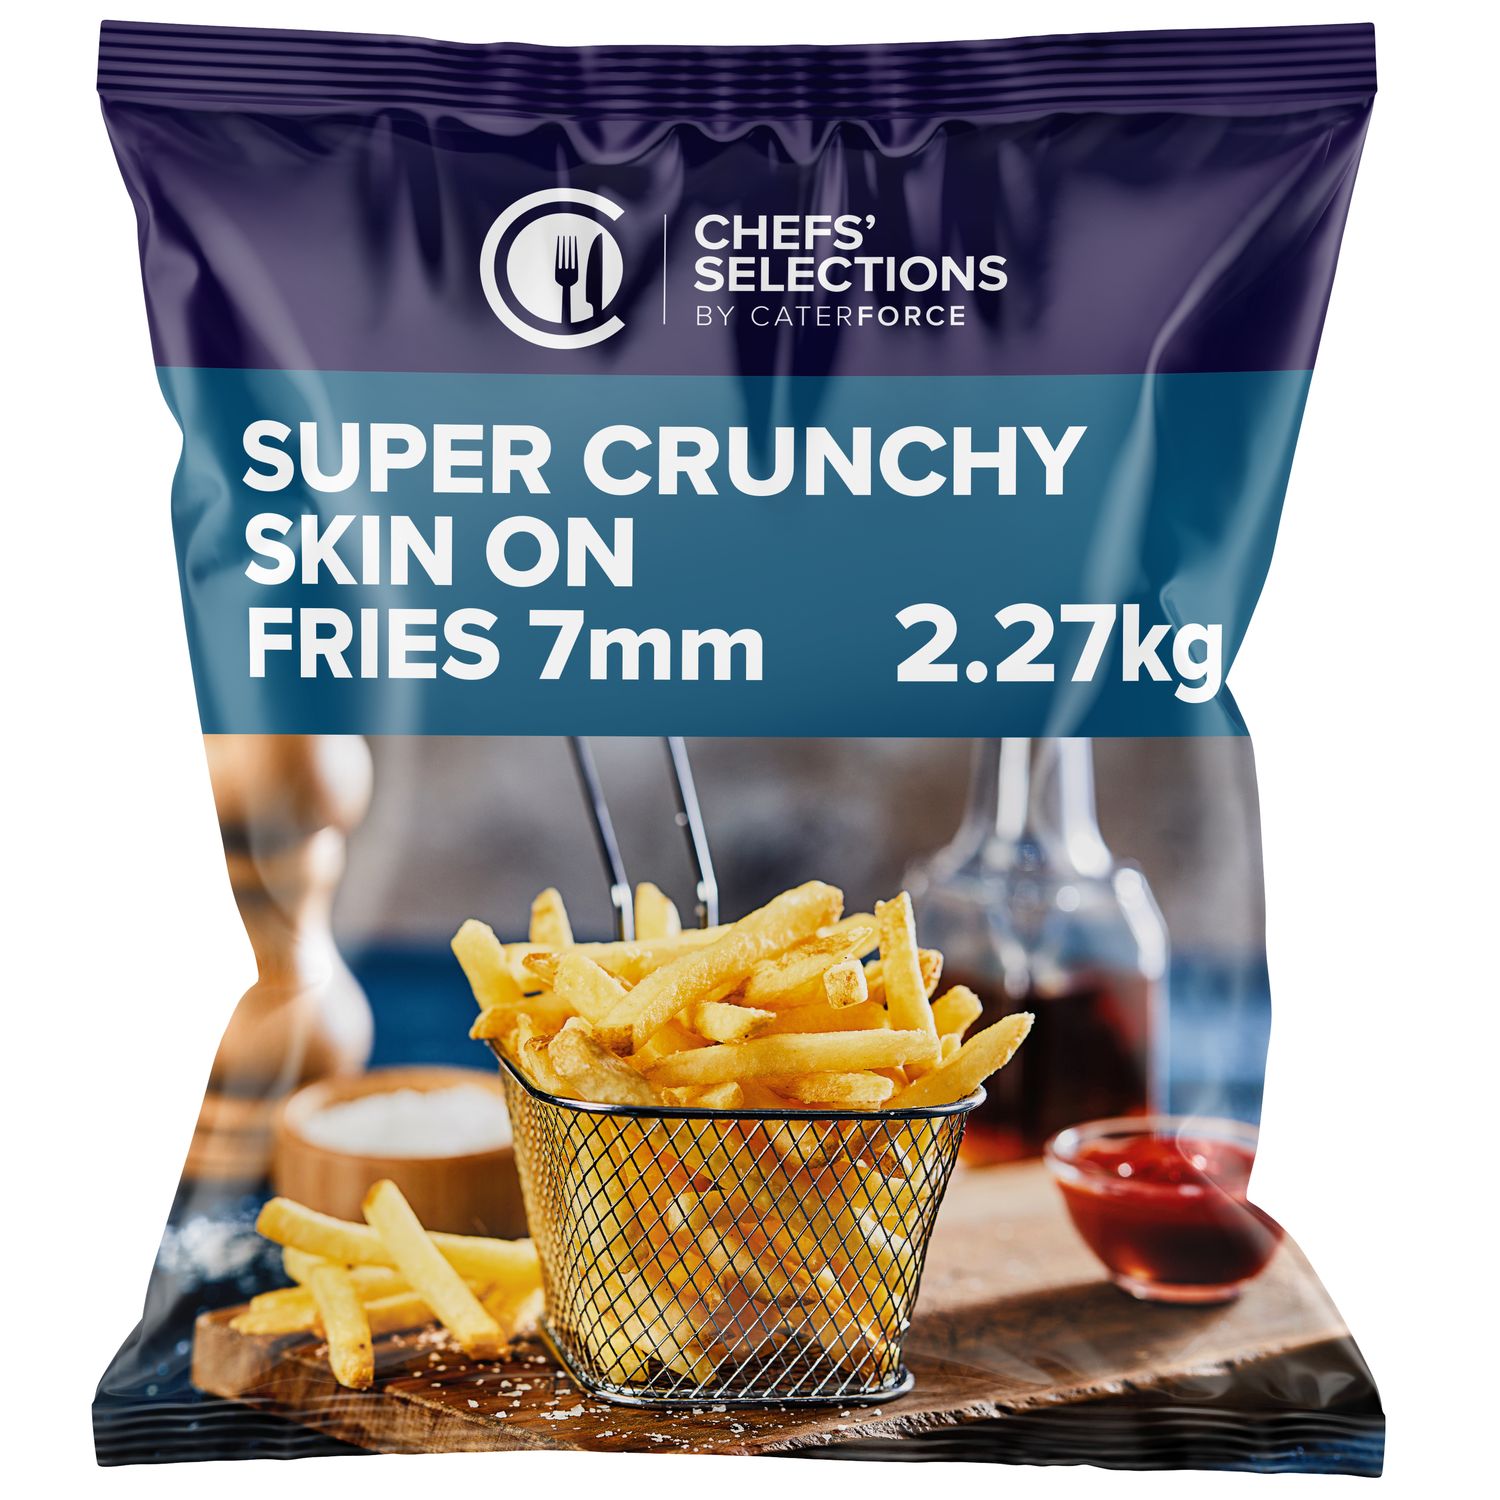 Chefs’ Selections Super Crunchy Skin-on Fries 7mm (4 x 2.27kg)